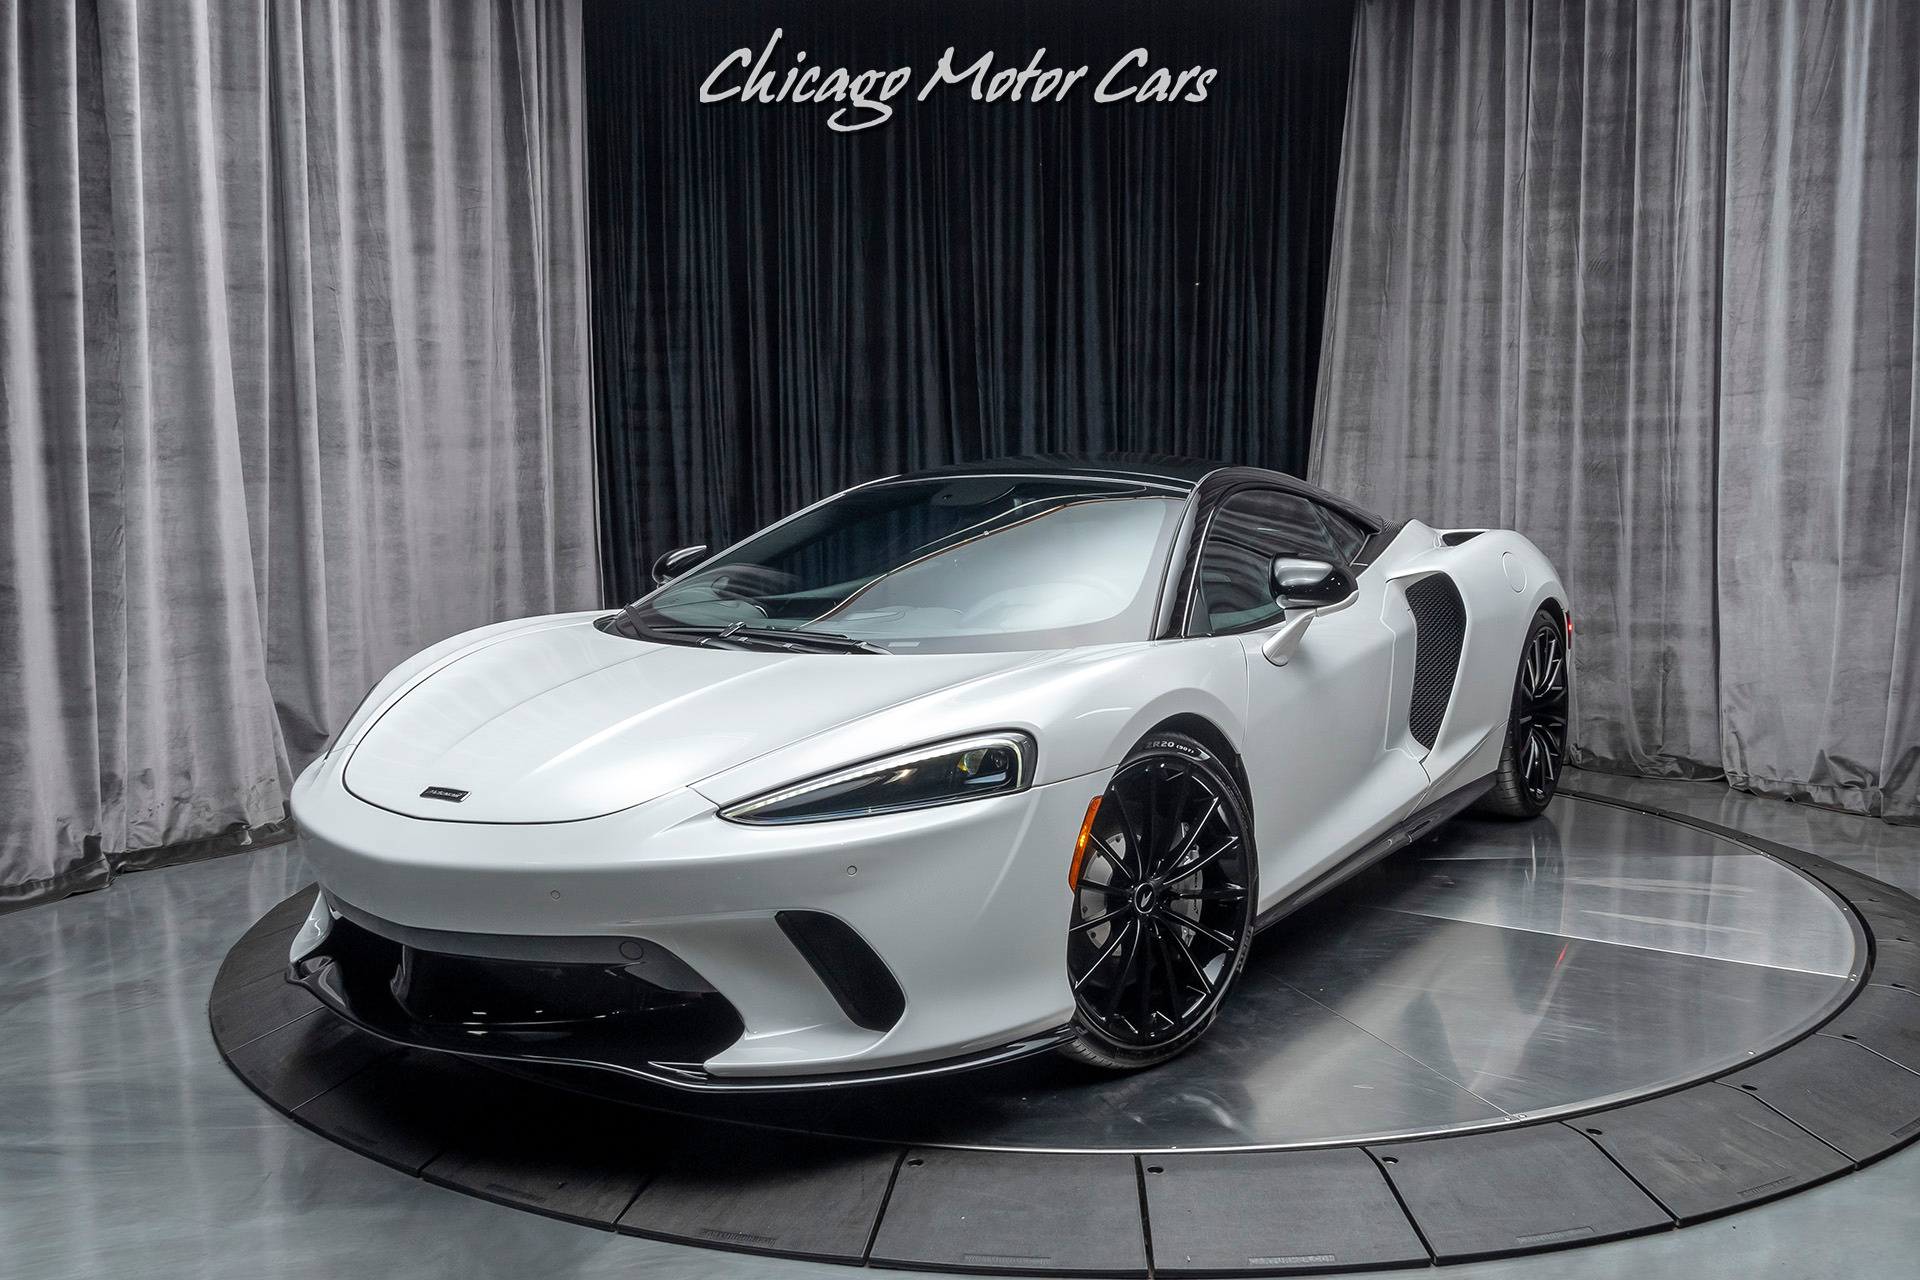 Used 2020 McLaren GT P22 Luxe Coupe Original MSRP 243k+ ONLY 160